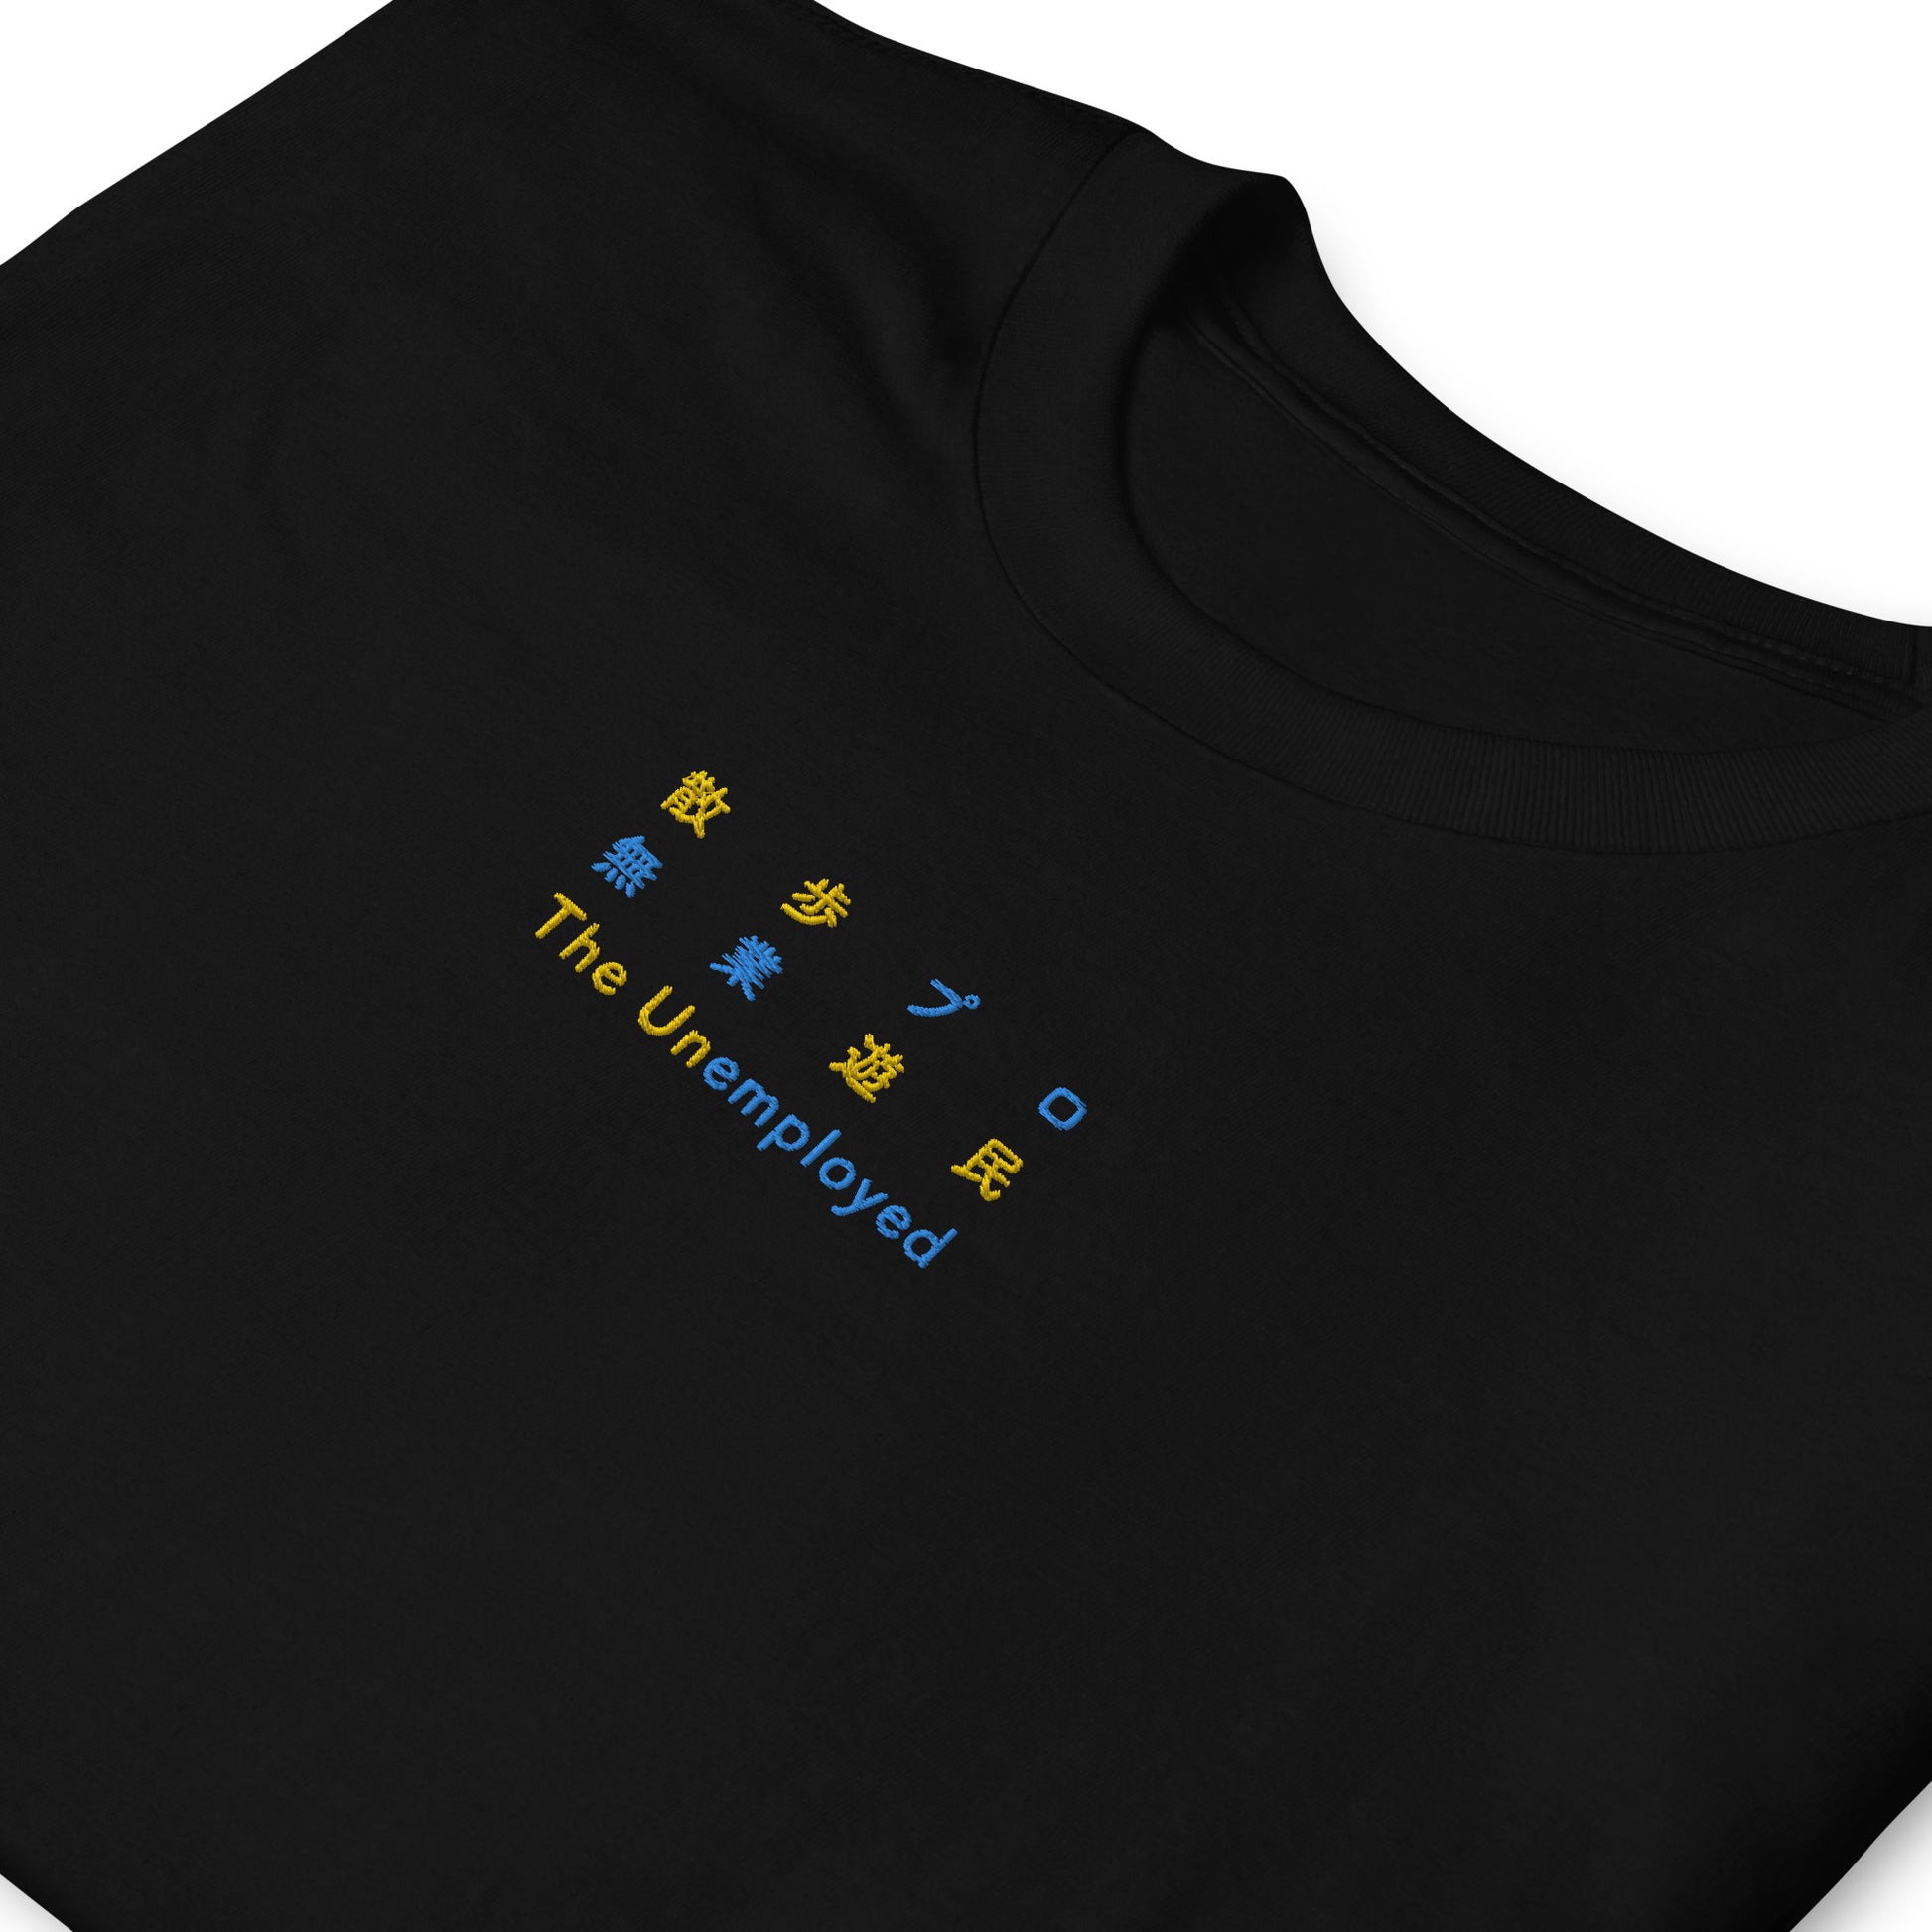 Black High Quality Tee - Front Design with Yellow/Blue Embroidery "The Unemployed" in three languages